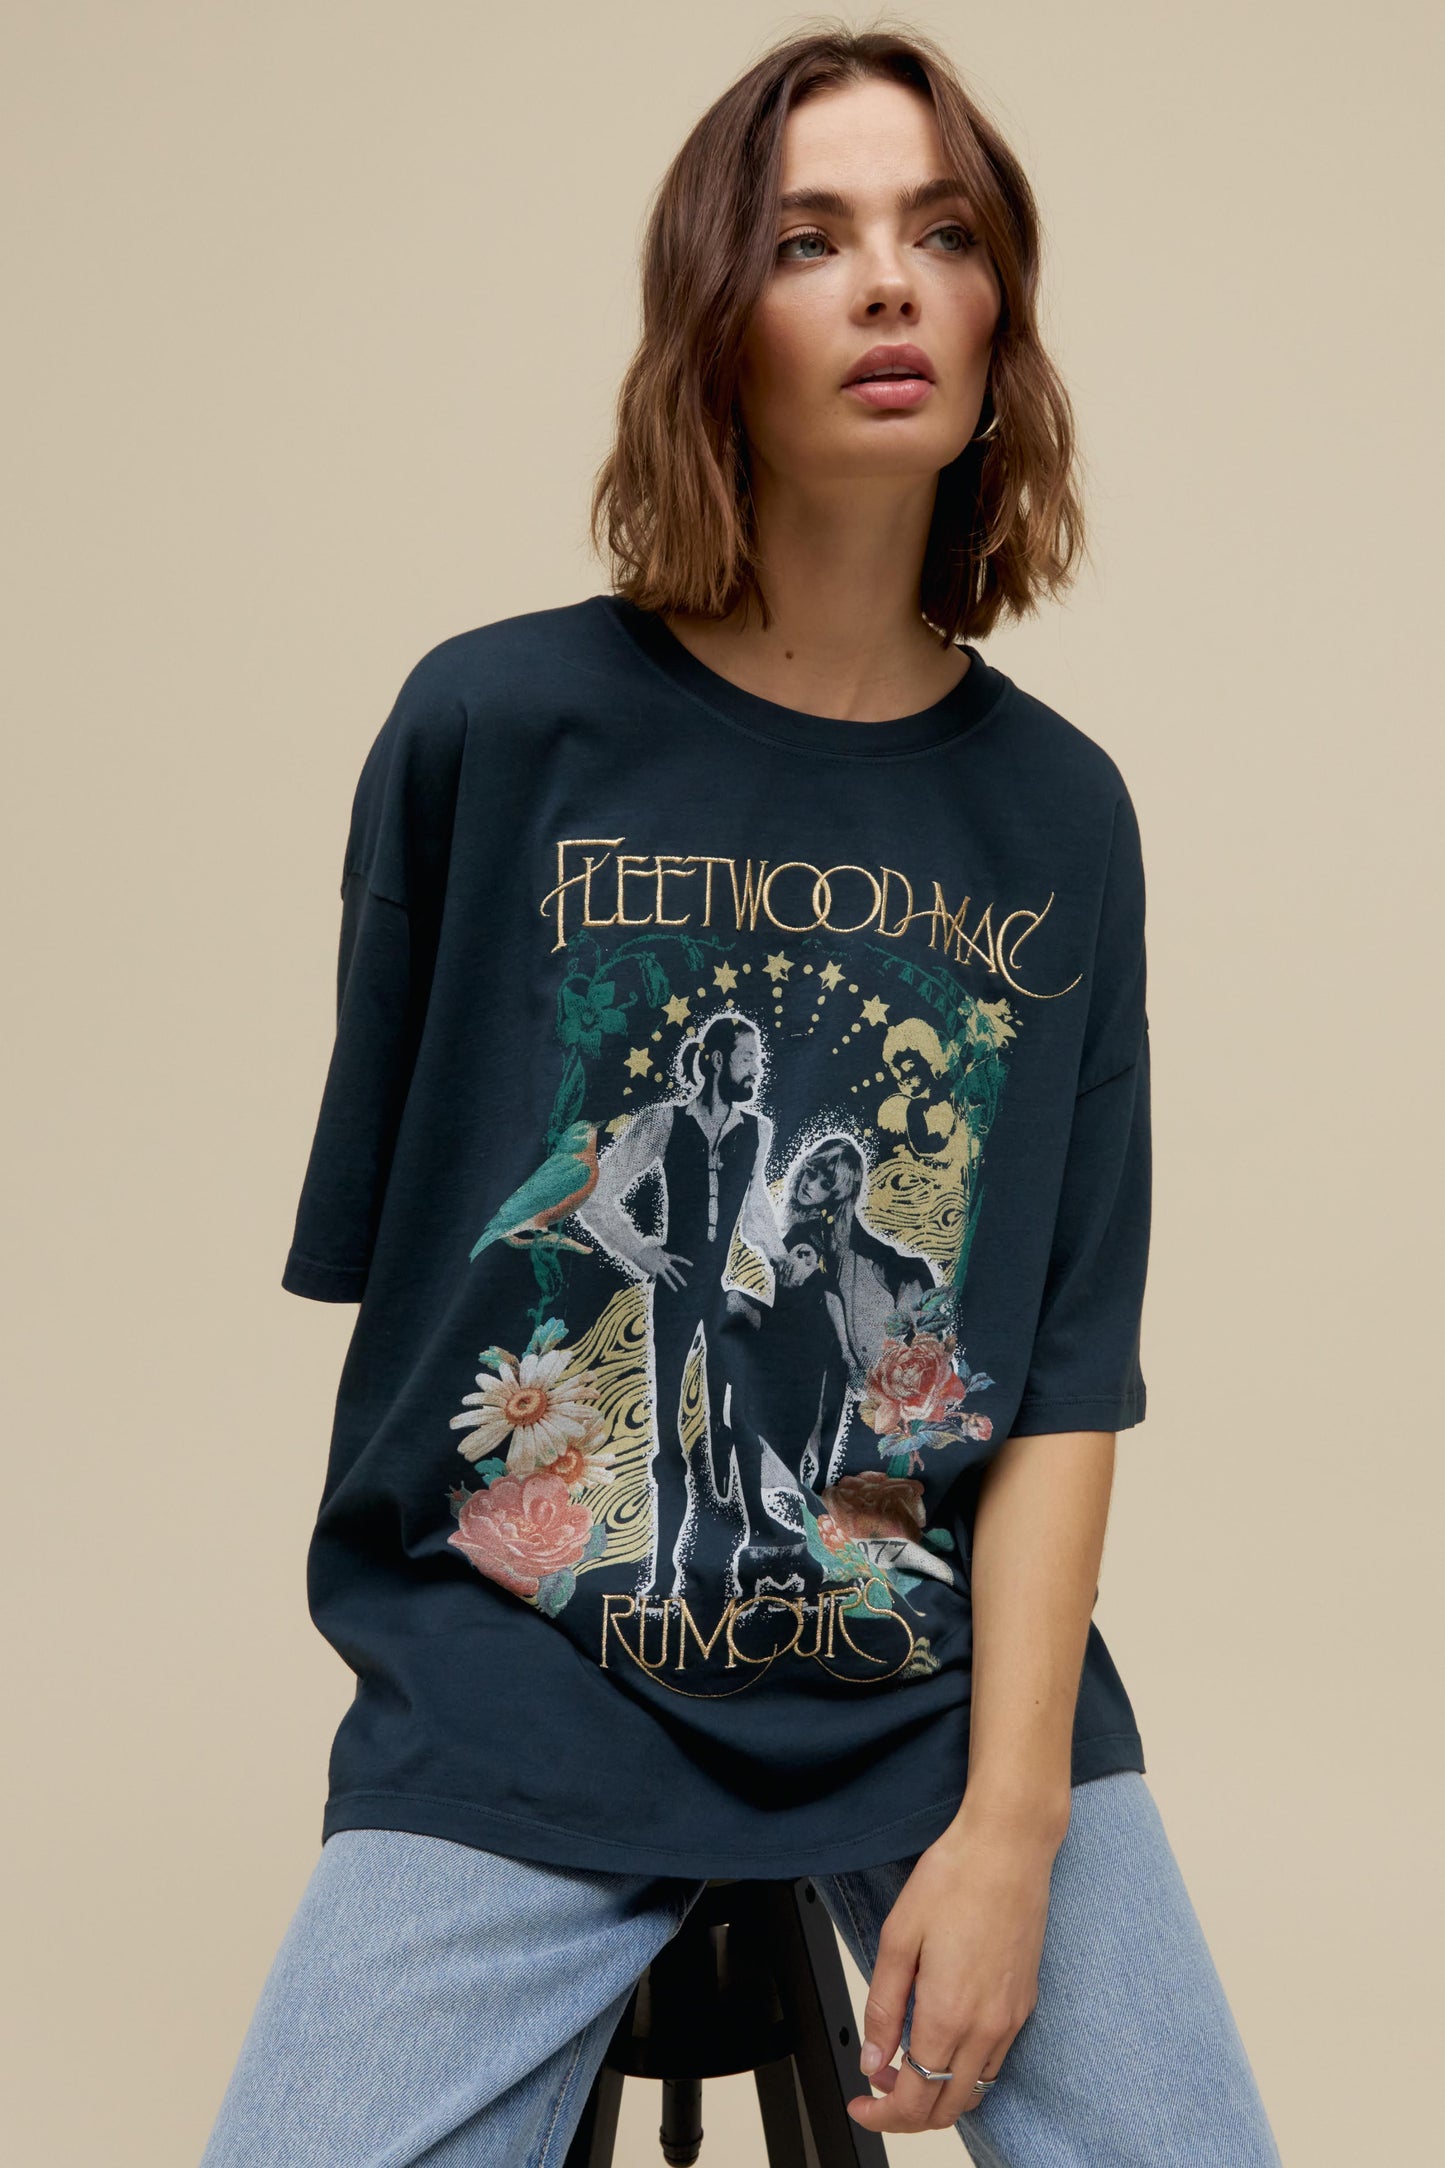 Short-haired model wearing an oversized Fleetwood Mac graphic tee with gold embroidery and floral artwork